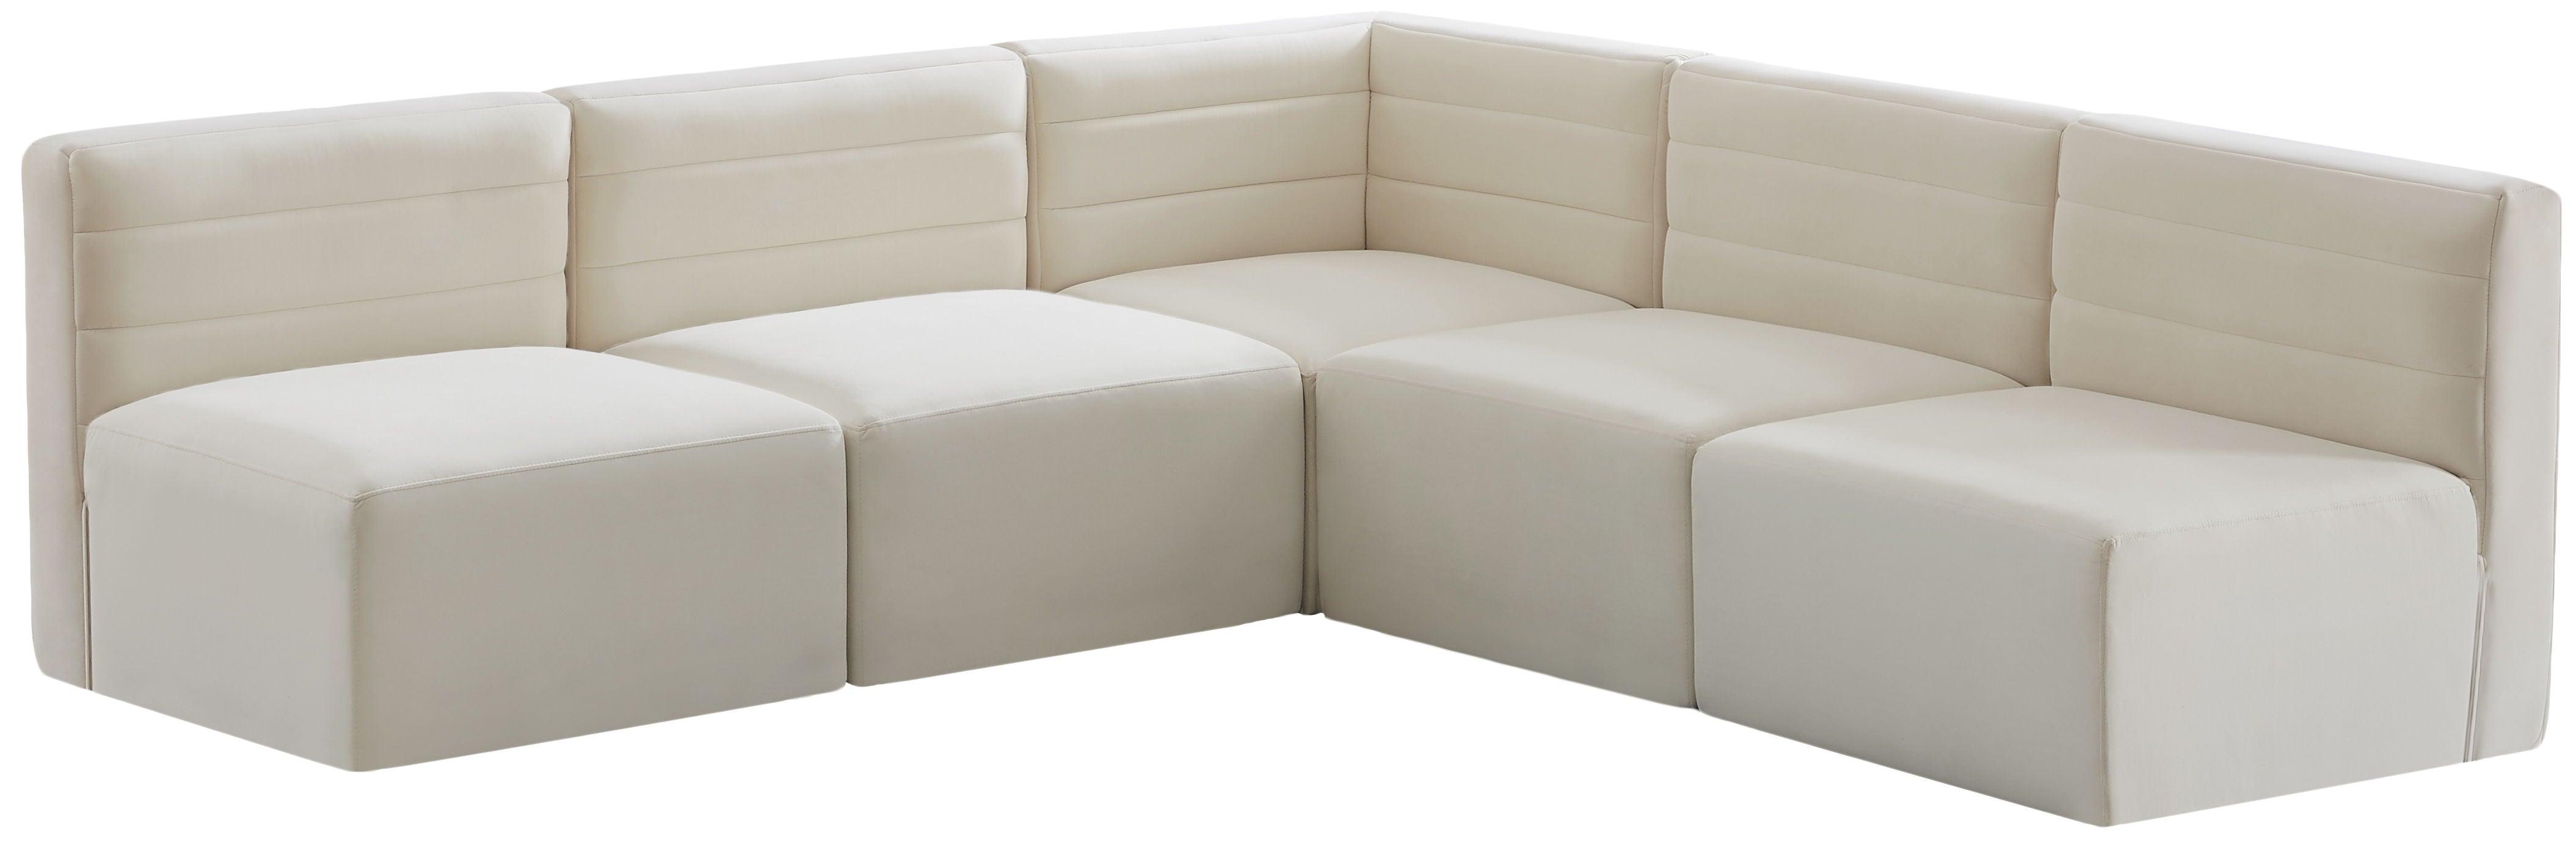 Meridian Furniture - Quincy - Modular Sectional - Modern & Contemporary - 5th Avenue Furniture